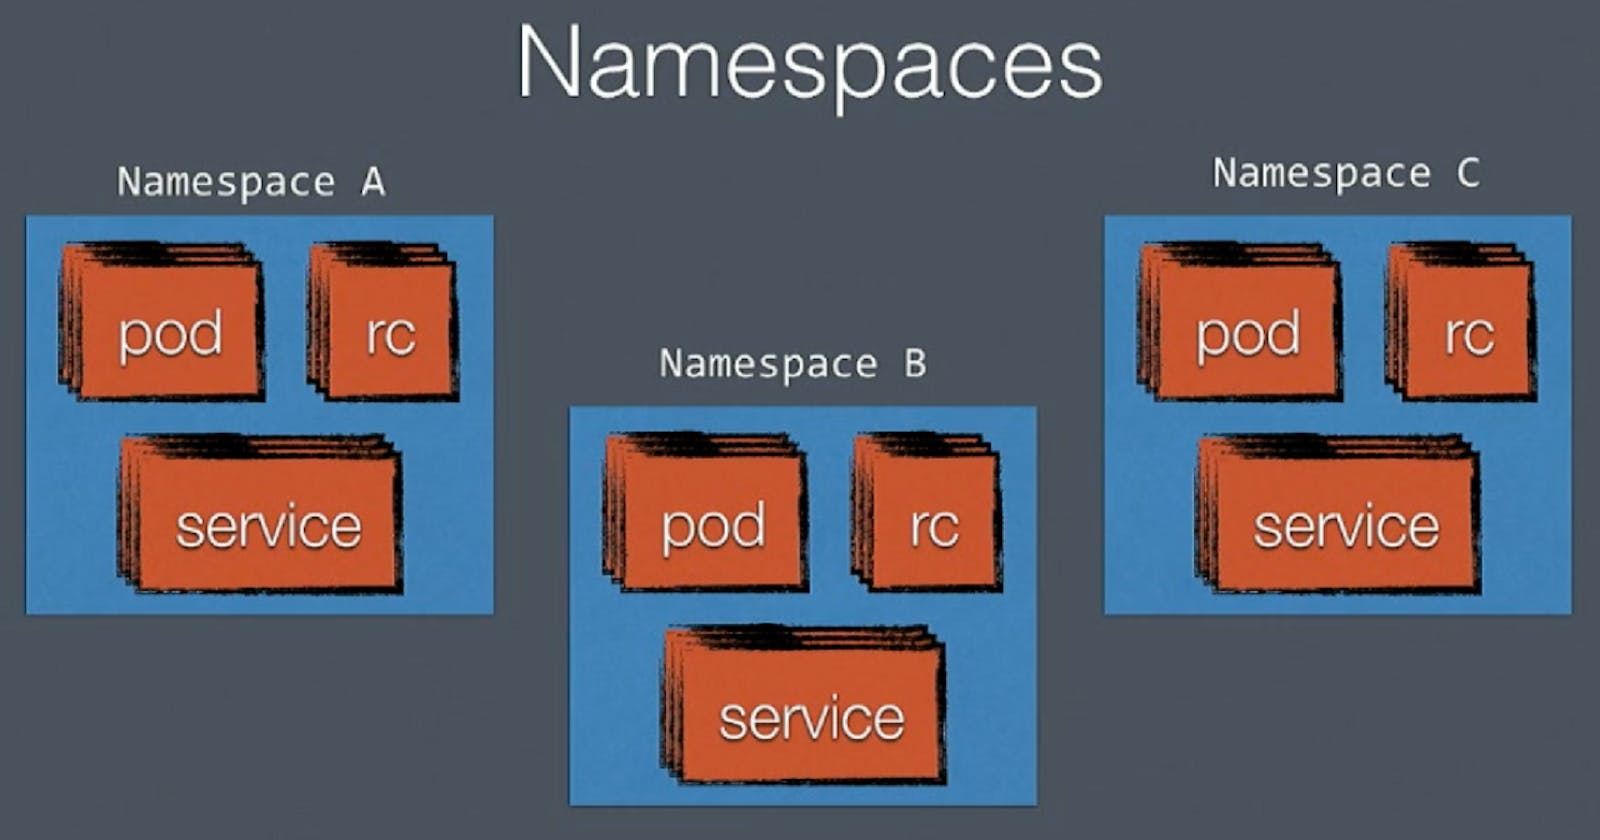 #Day33 : Working with Namespaces and Services in Kubernetes